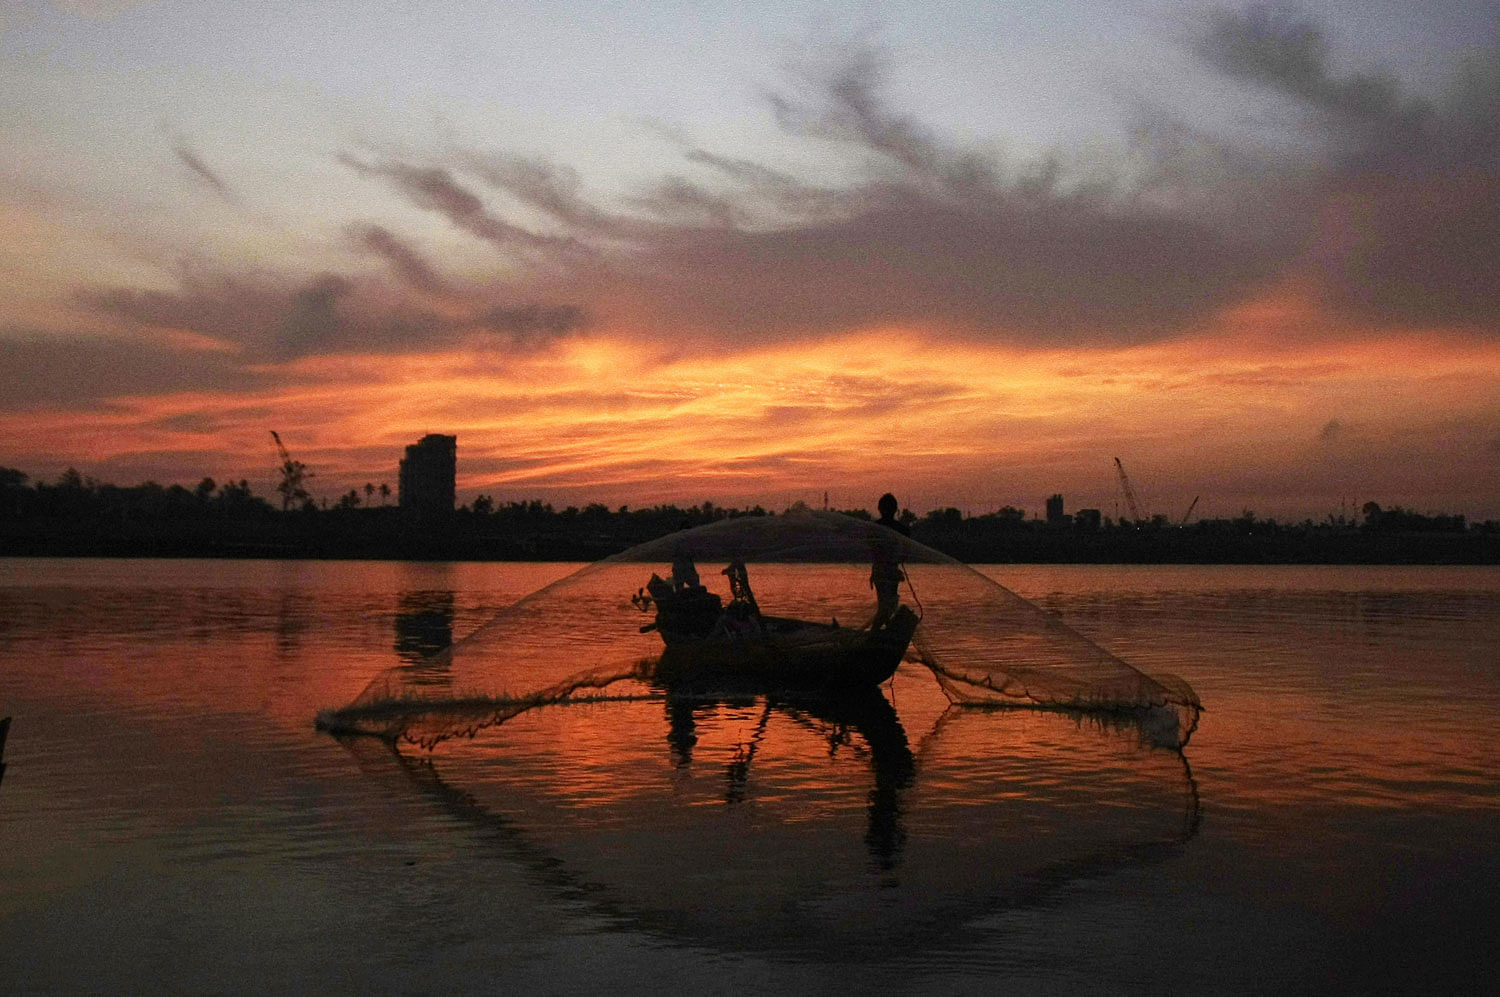 A Cambodian fisherman throws his fishing net in the morning from a wooden boat at Tonle Sap river in Phnom Penh, Cambodia. AP